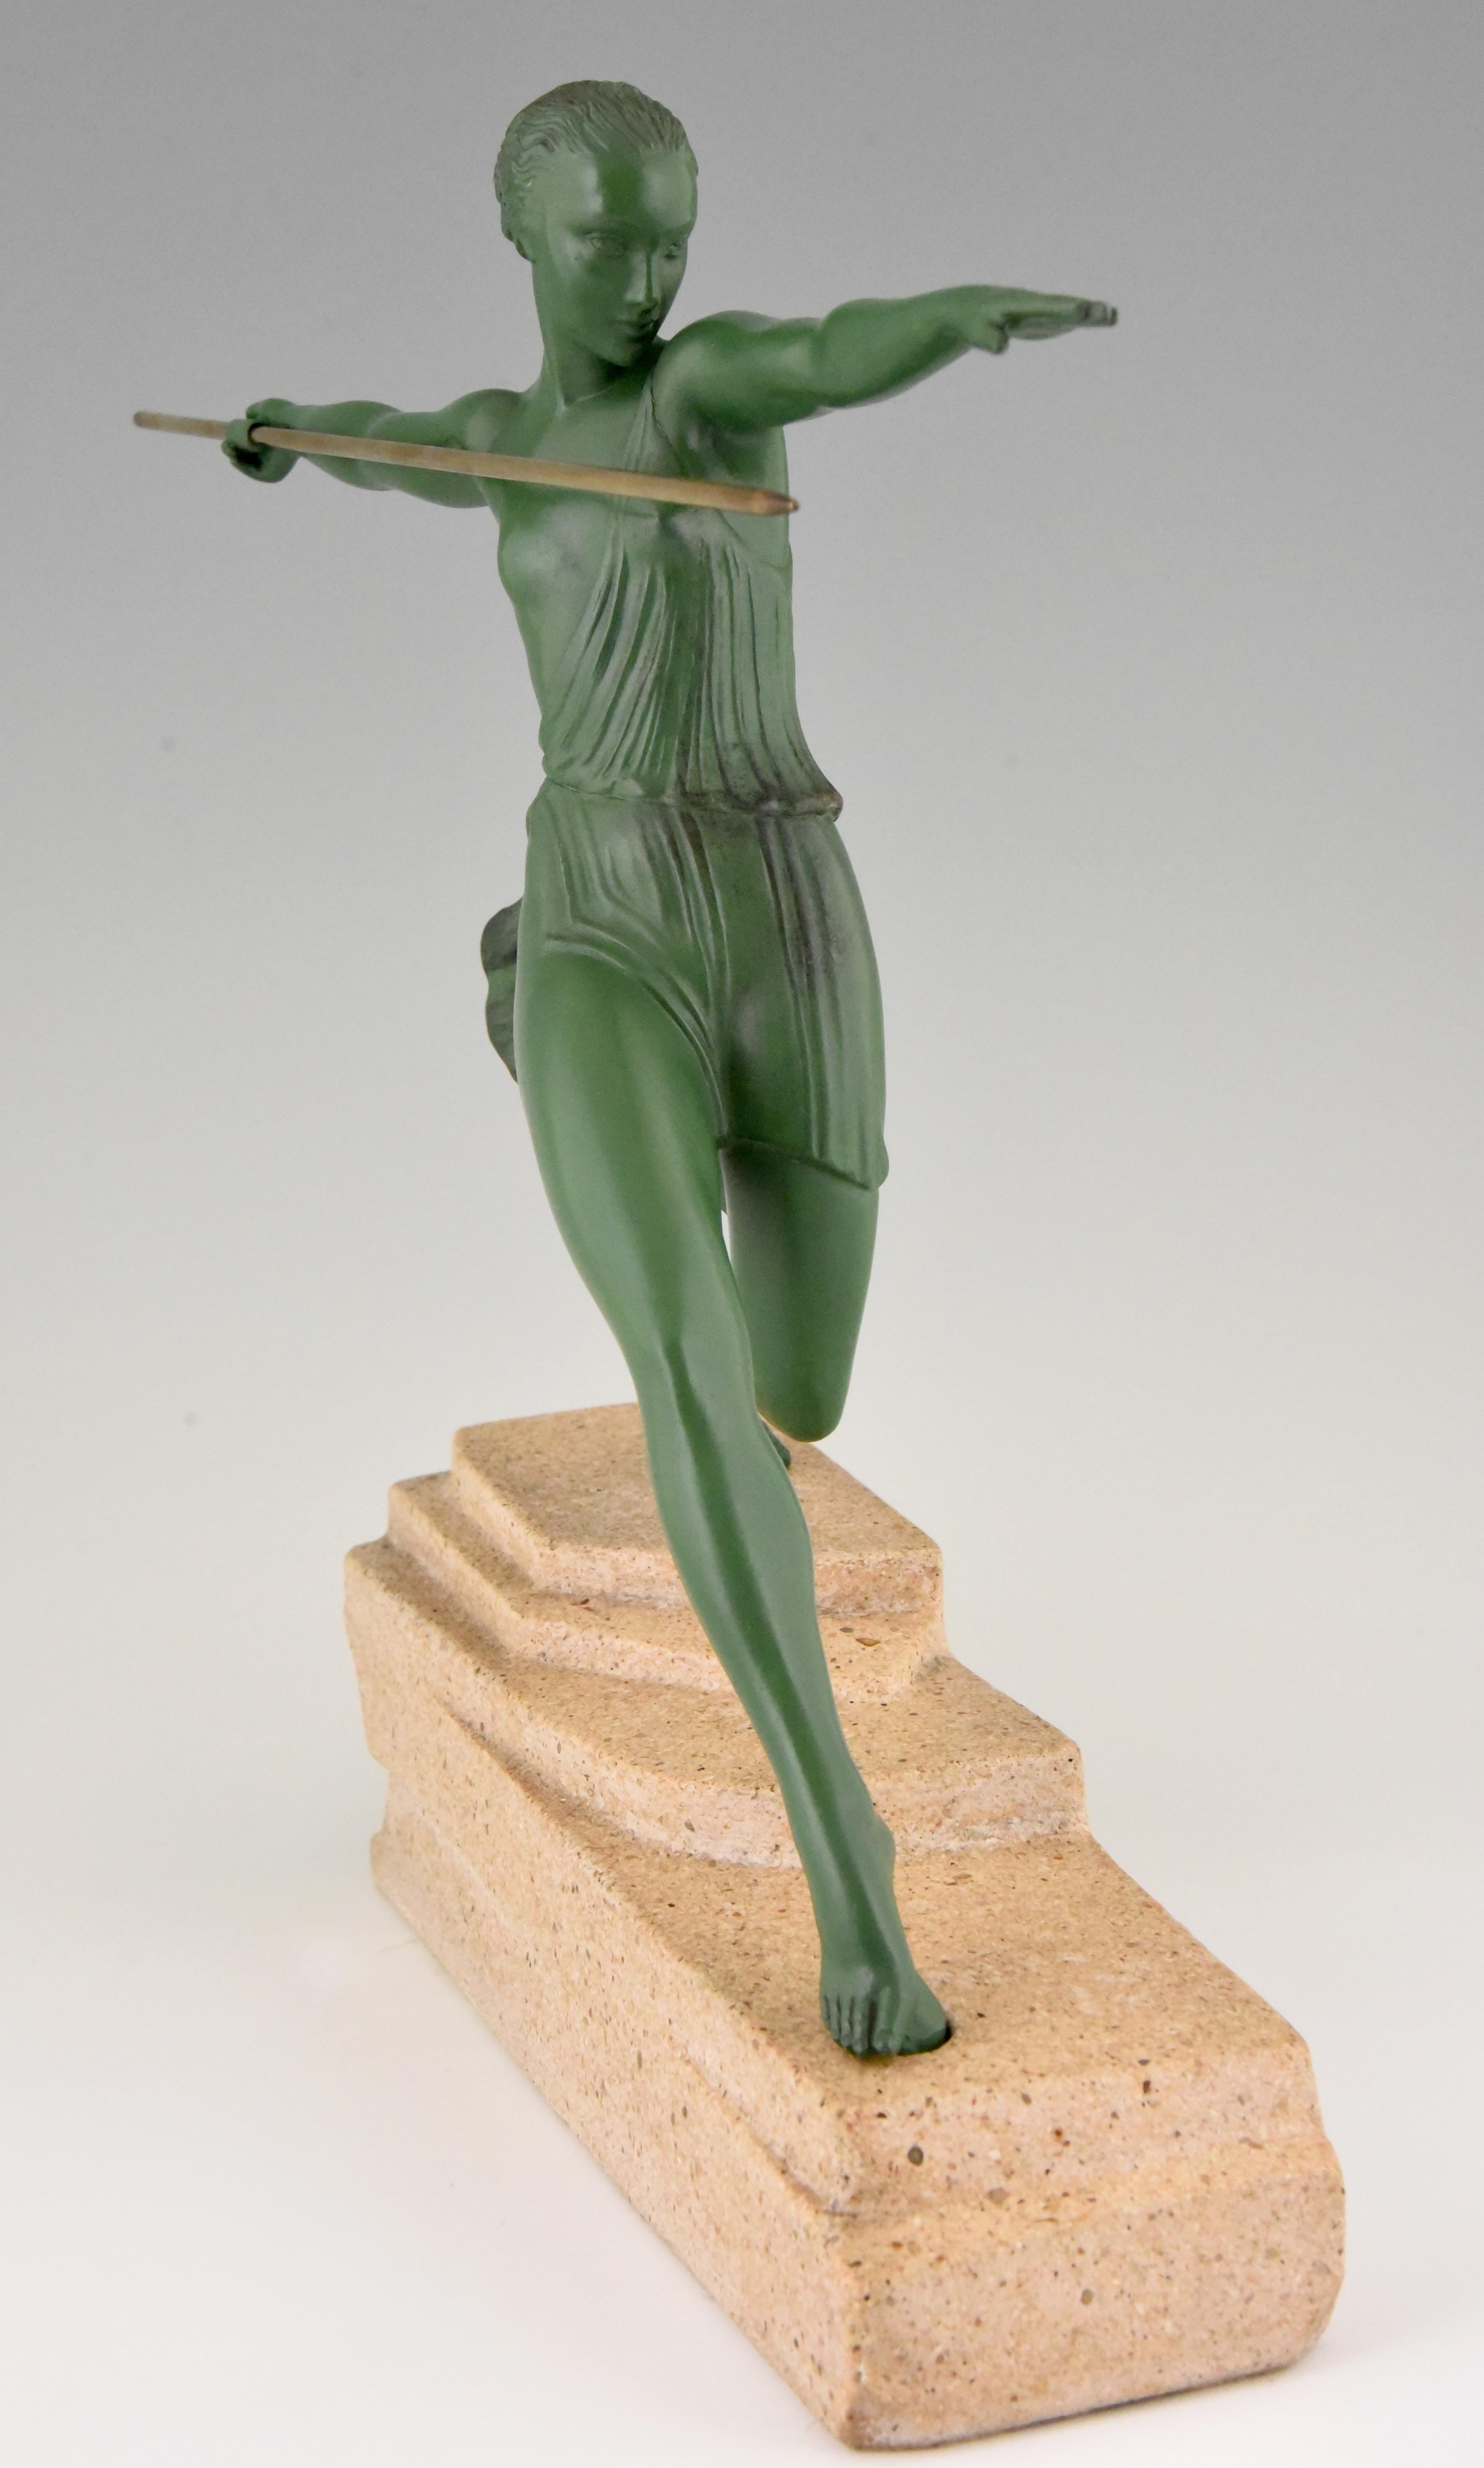 French Art Deco Sculpture Female Javelin Thrower Fayral, Pierre Le Faguays